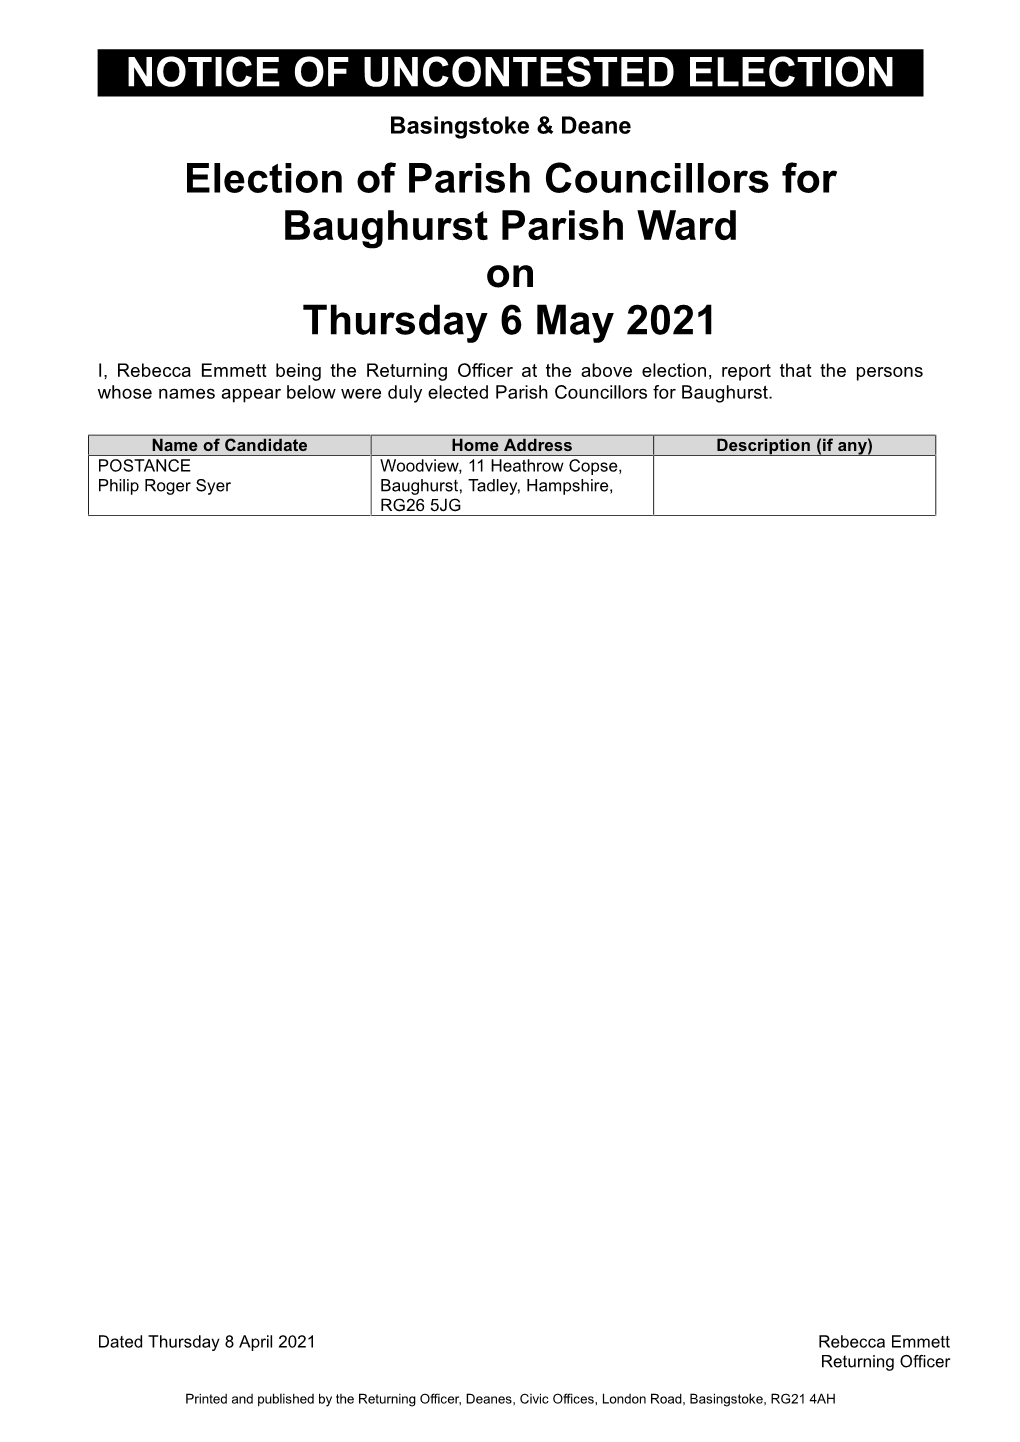 NOTICE of UNCONTESTED ELECTION Basingstoke & Deane Election of Parish Councillors for Baughurst Parish Ward on Thursday 6 May 2021